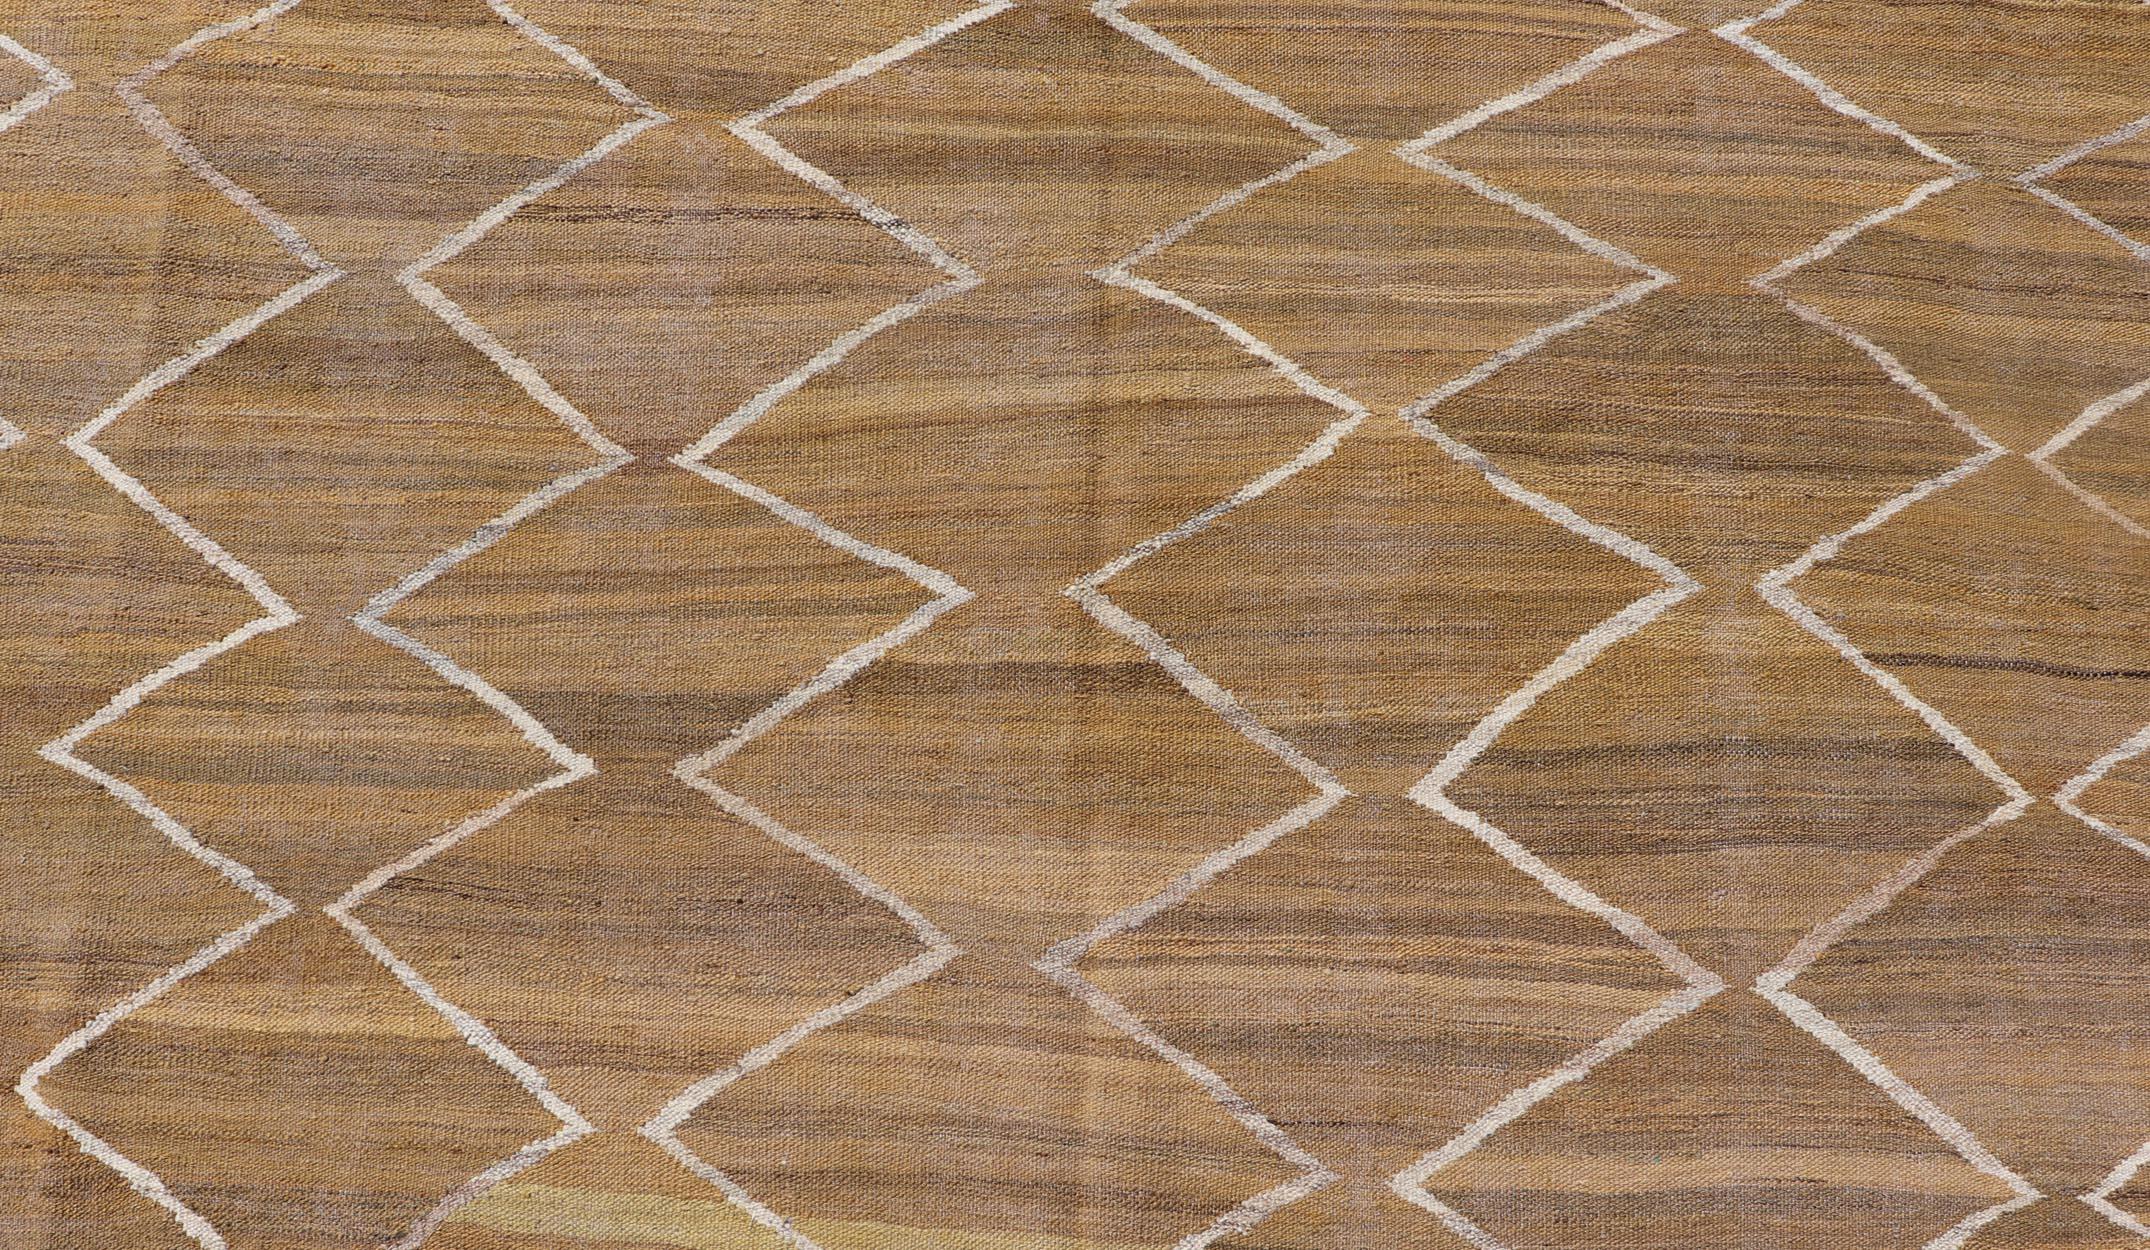 This flat-weave kilim has been hand-woven. The rug features a modern diamond design, rendered in marigold, ivory and brown tones; making this rug a superb fit for a variety of classic, modern, casual and minimalist interiors.

Modern Kilim rug,